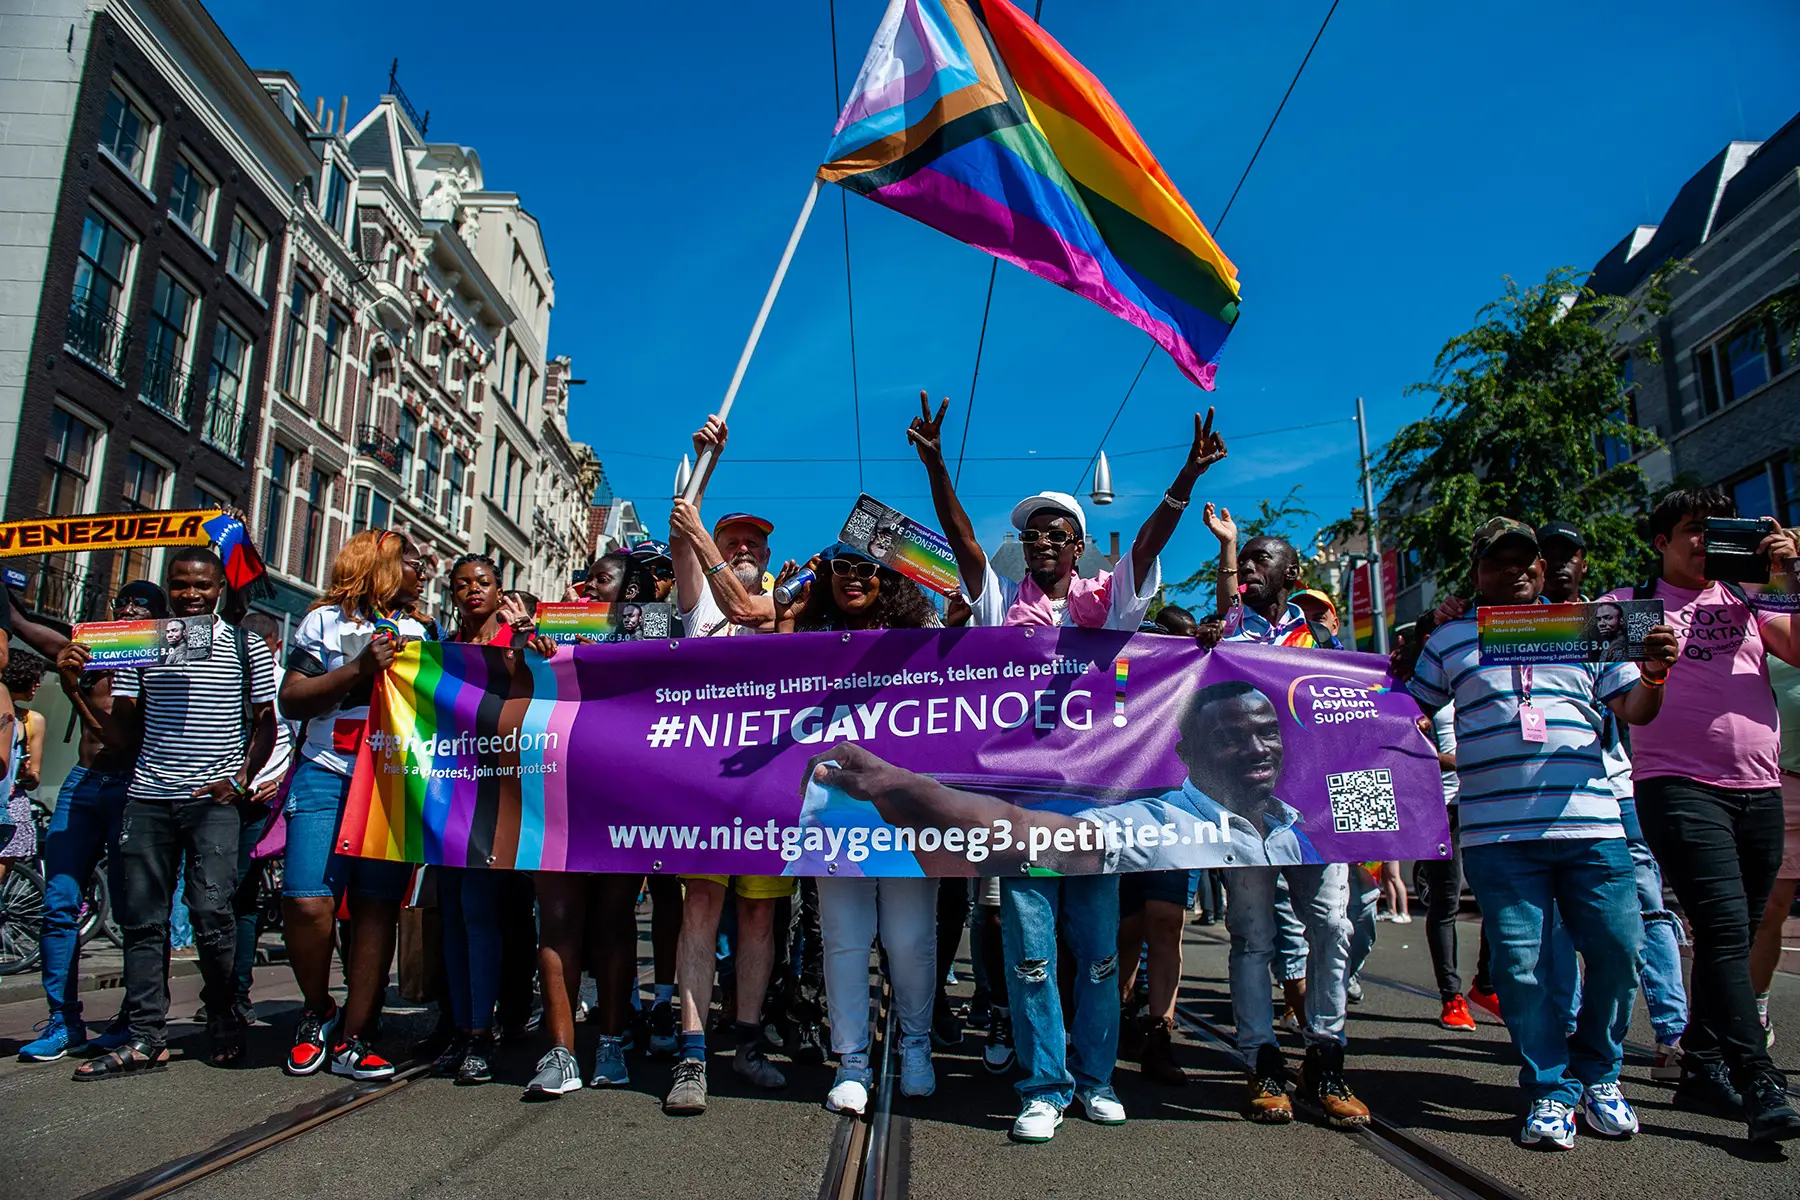 Protesters with a banner that says #NietGayGenoeg (not gay enough)